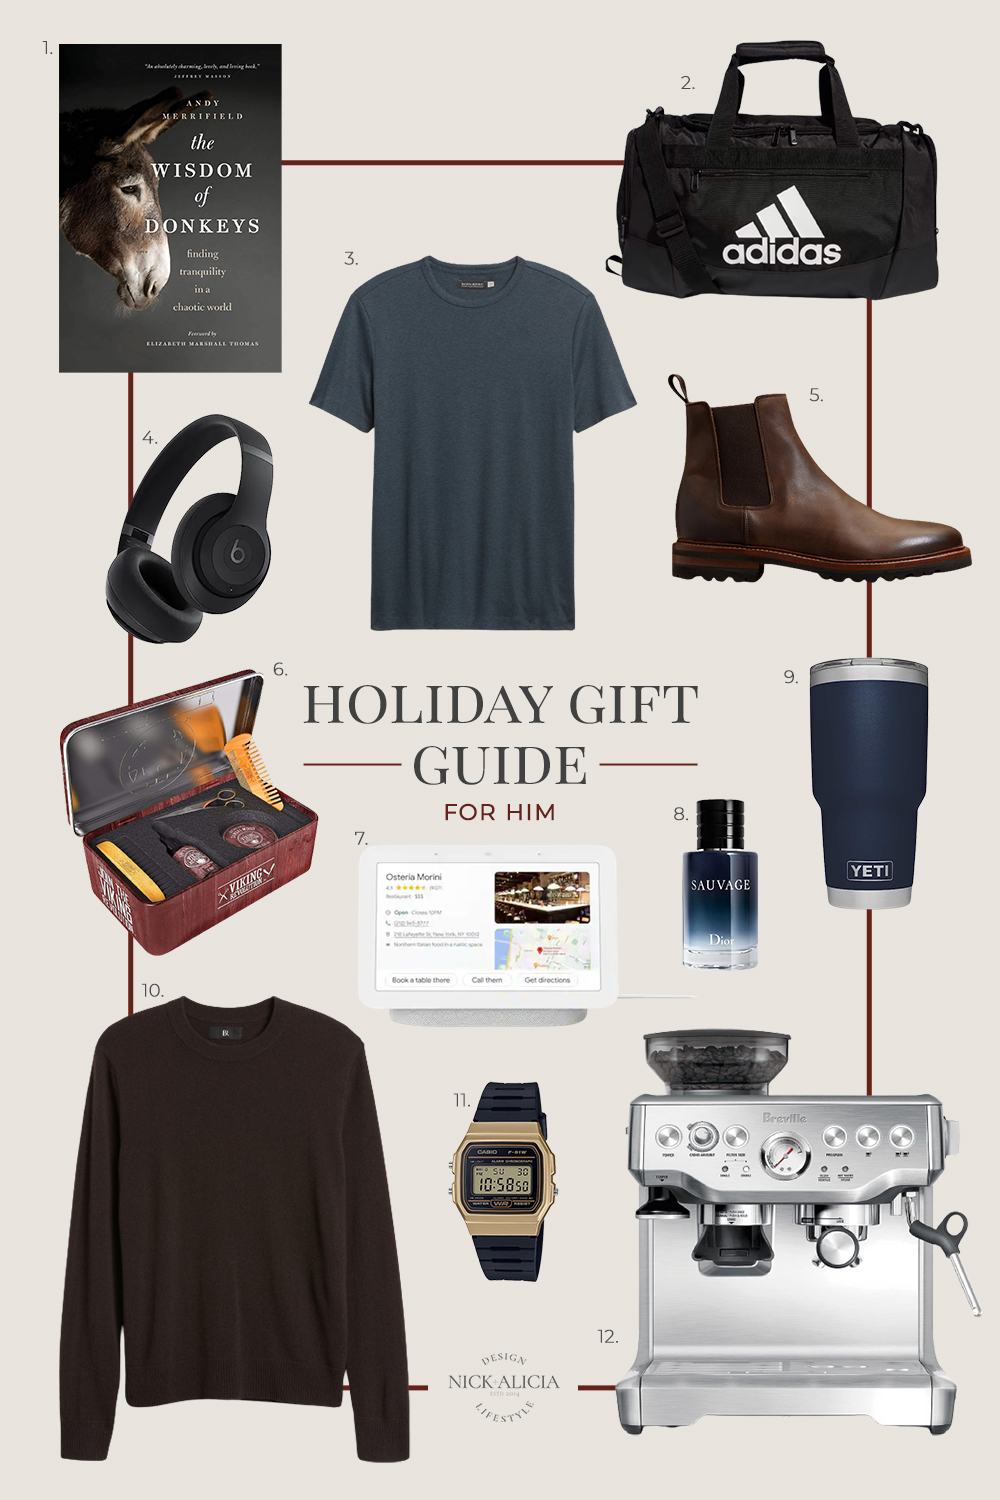 2023 Holiday Gift Guide 